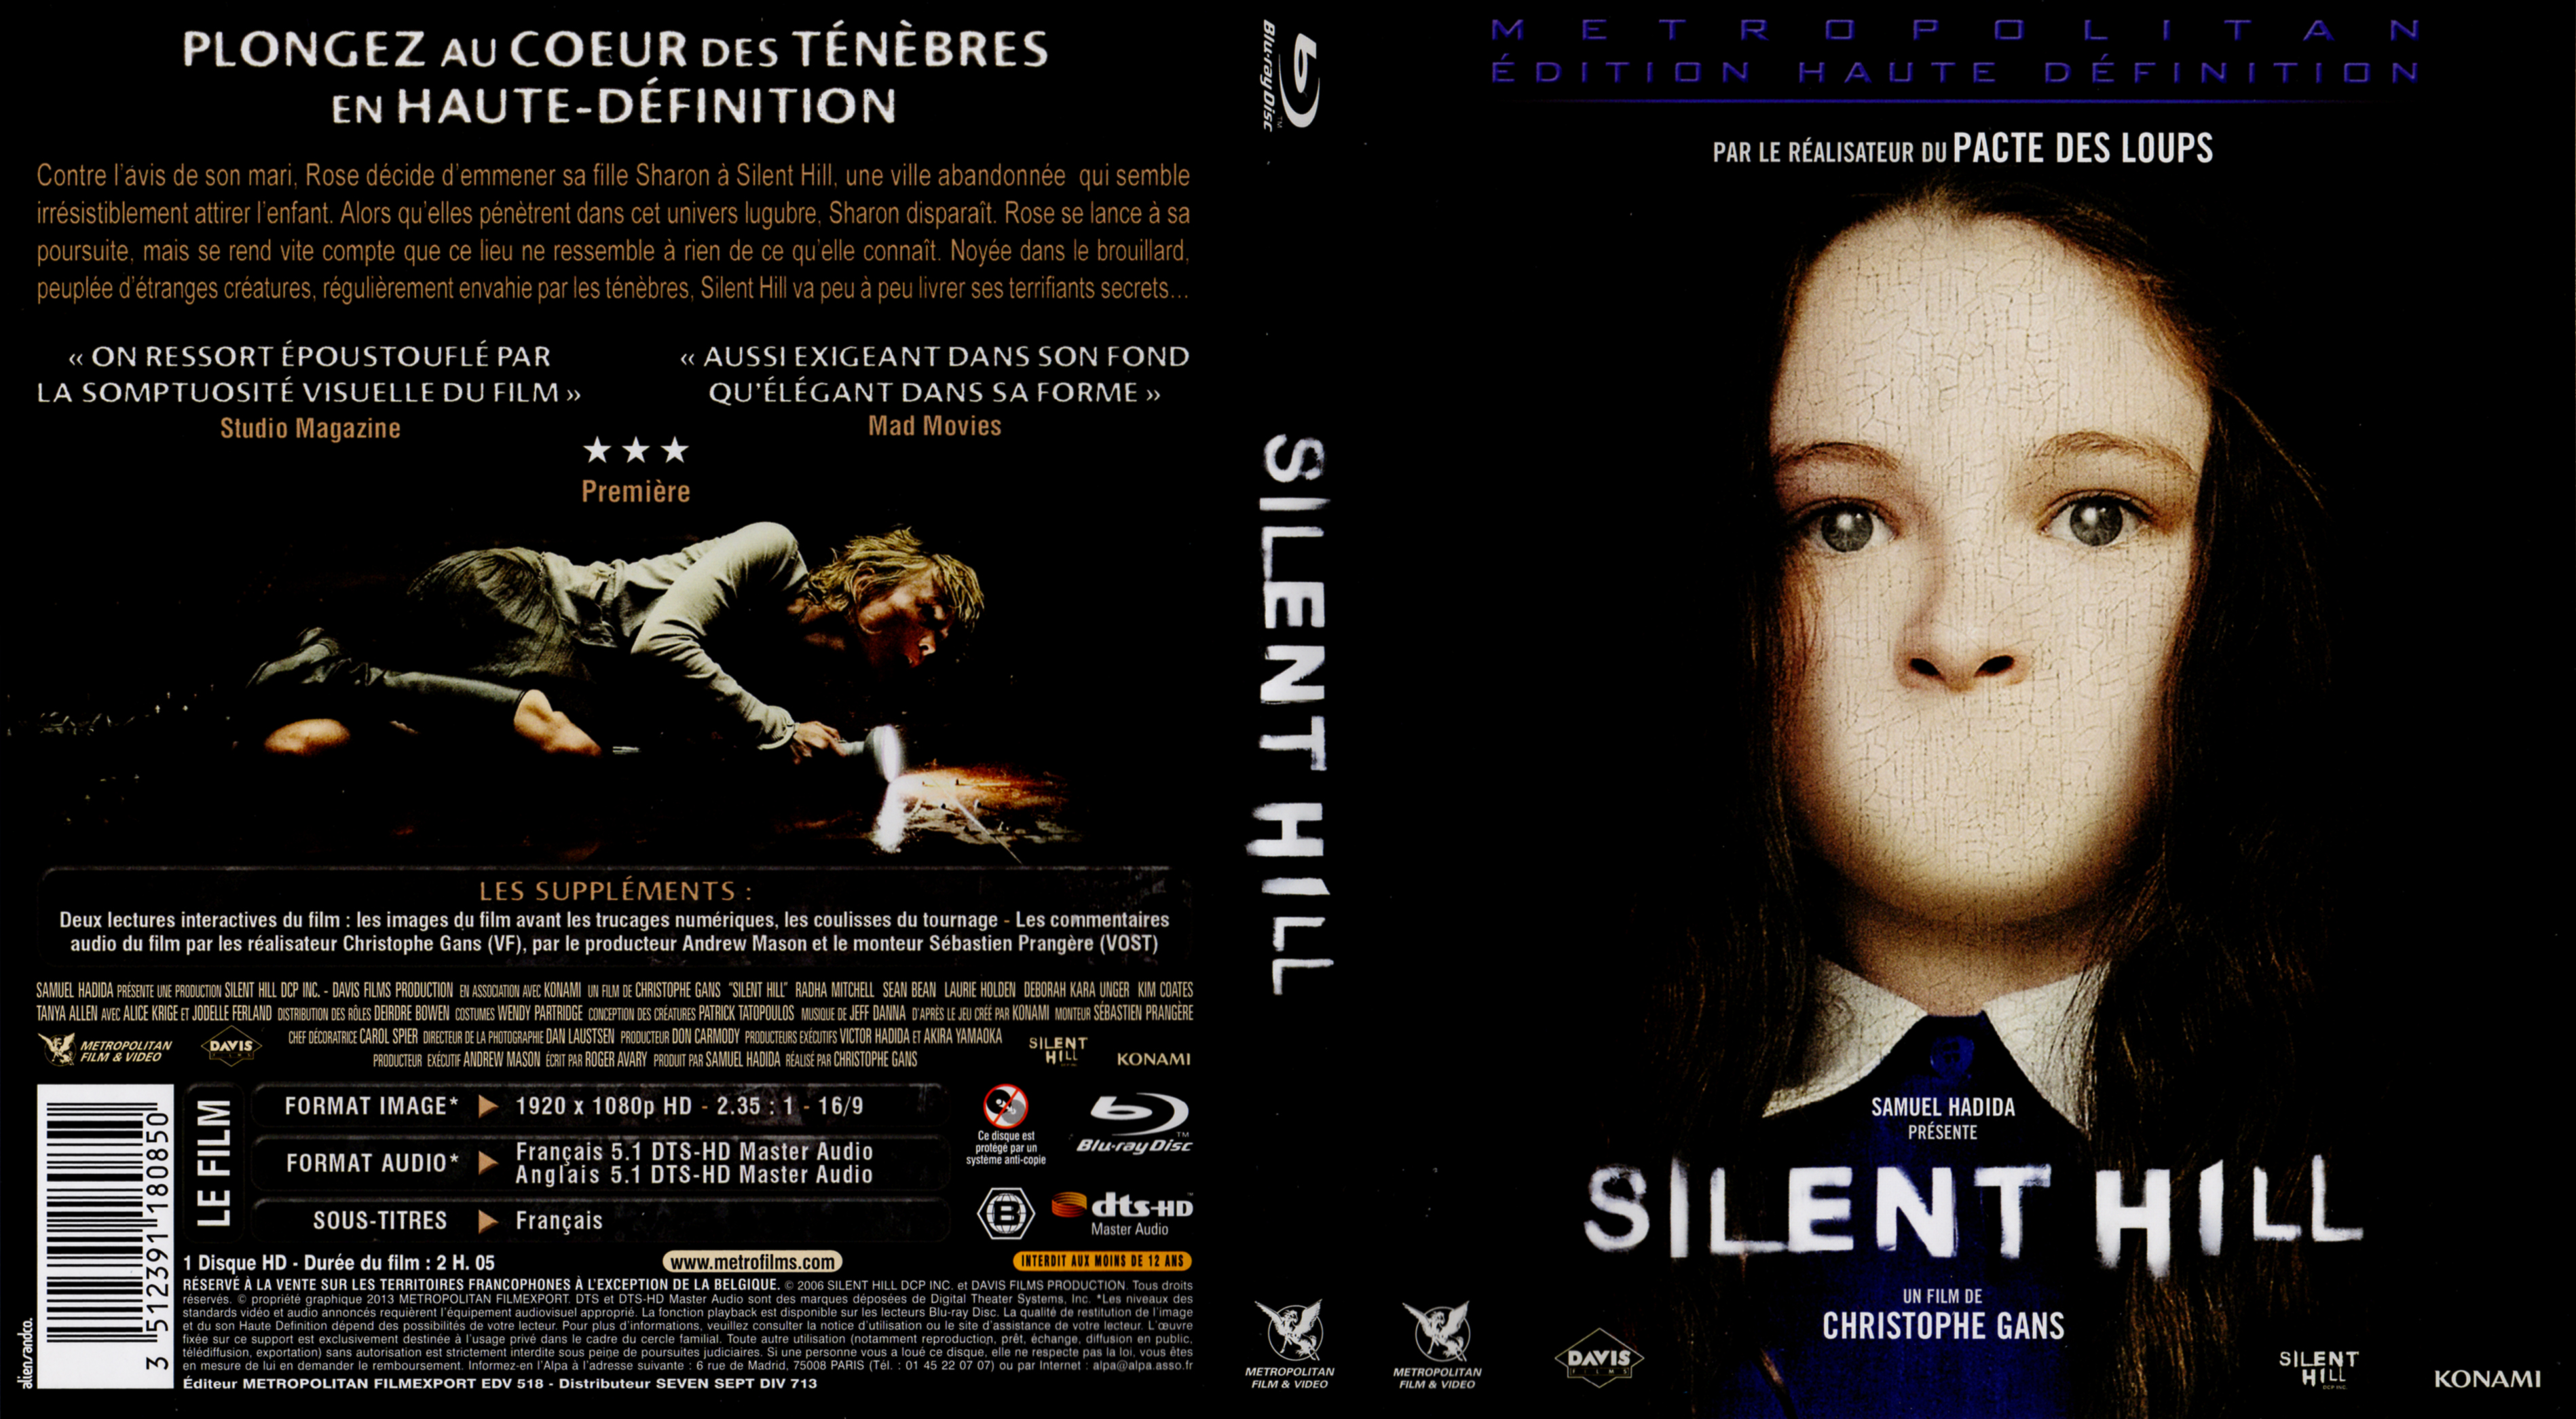 Jaquette DVD Silent hill (BLU-RAY) v6